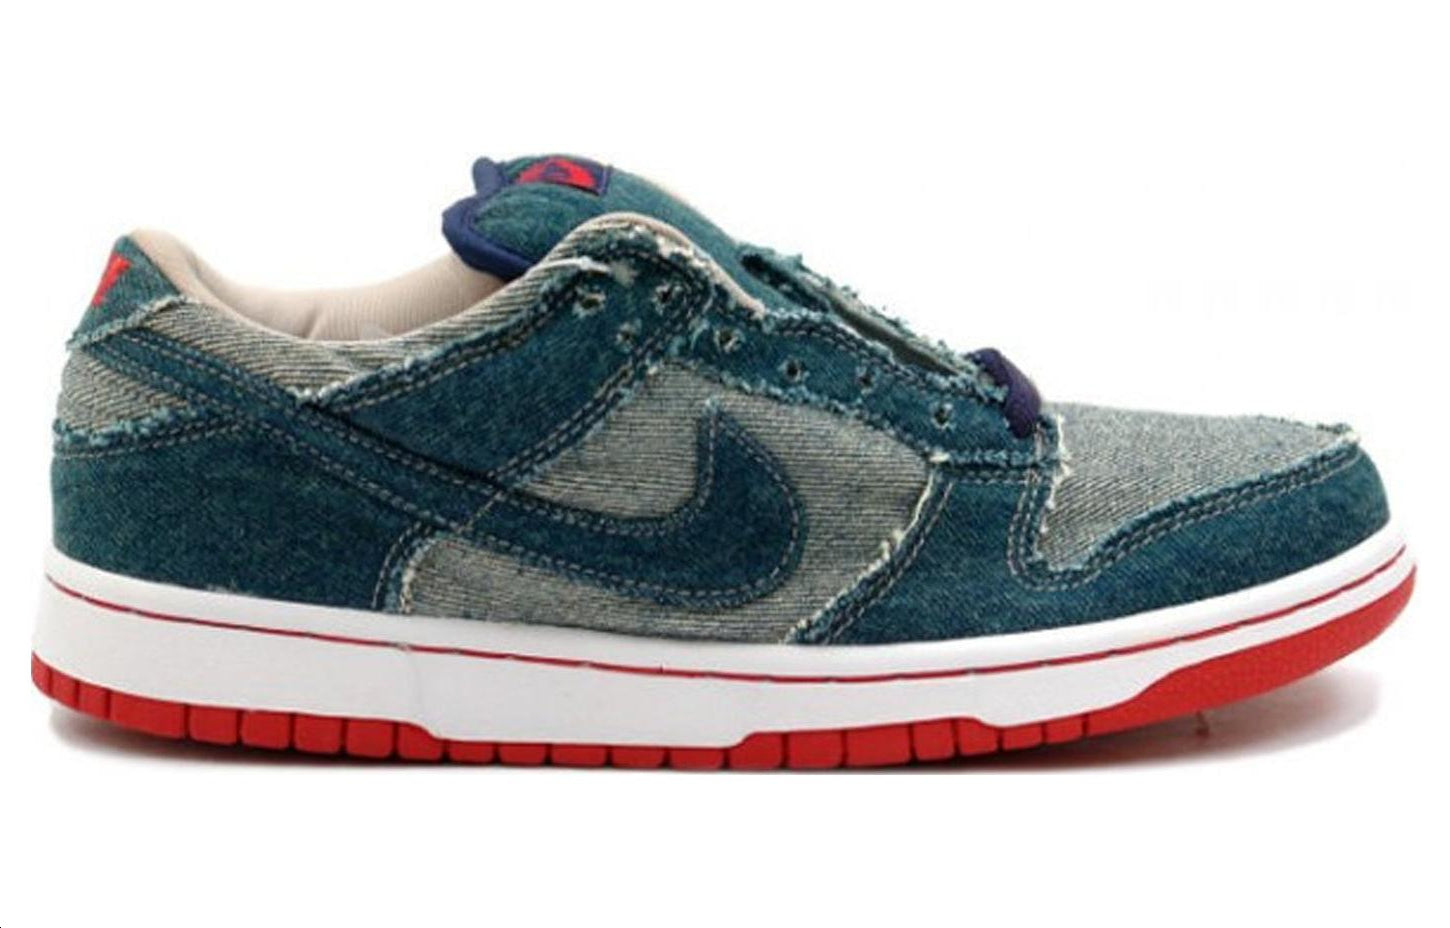 Nike Reese Forbes x Dunk Low Pro SB \'Denim\'  304292-441 Iconic Trainers